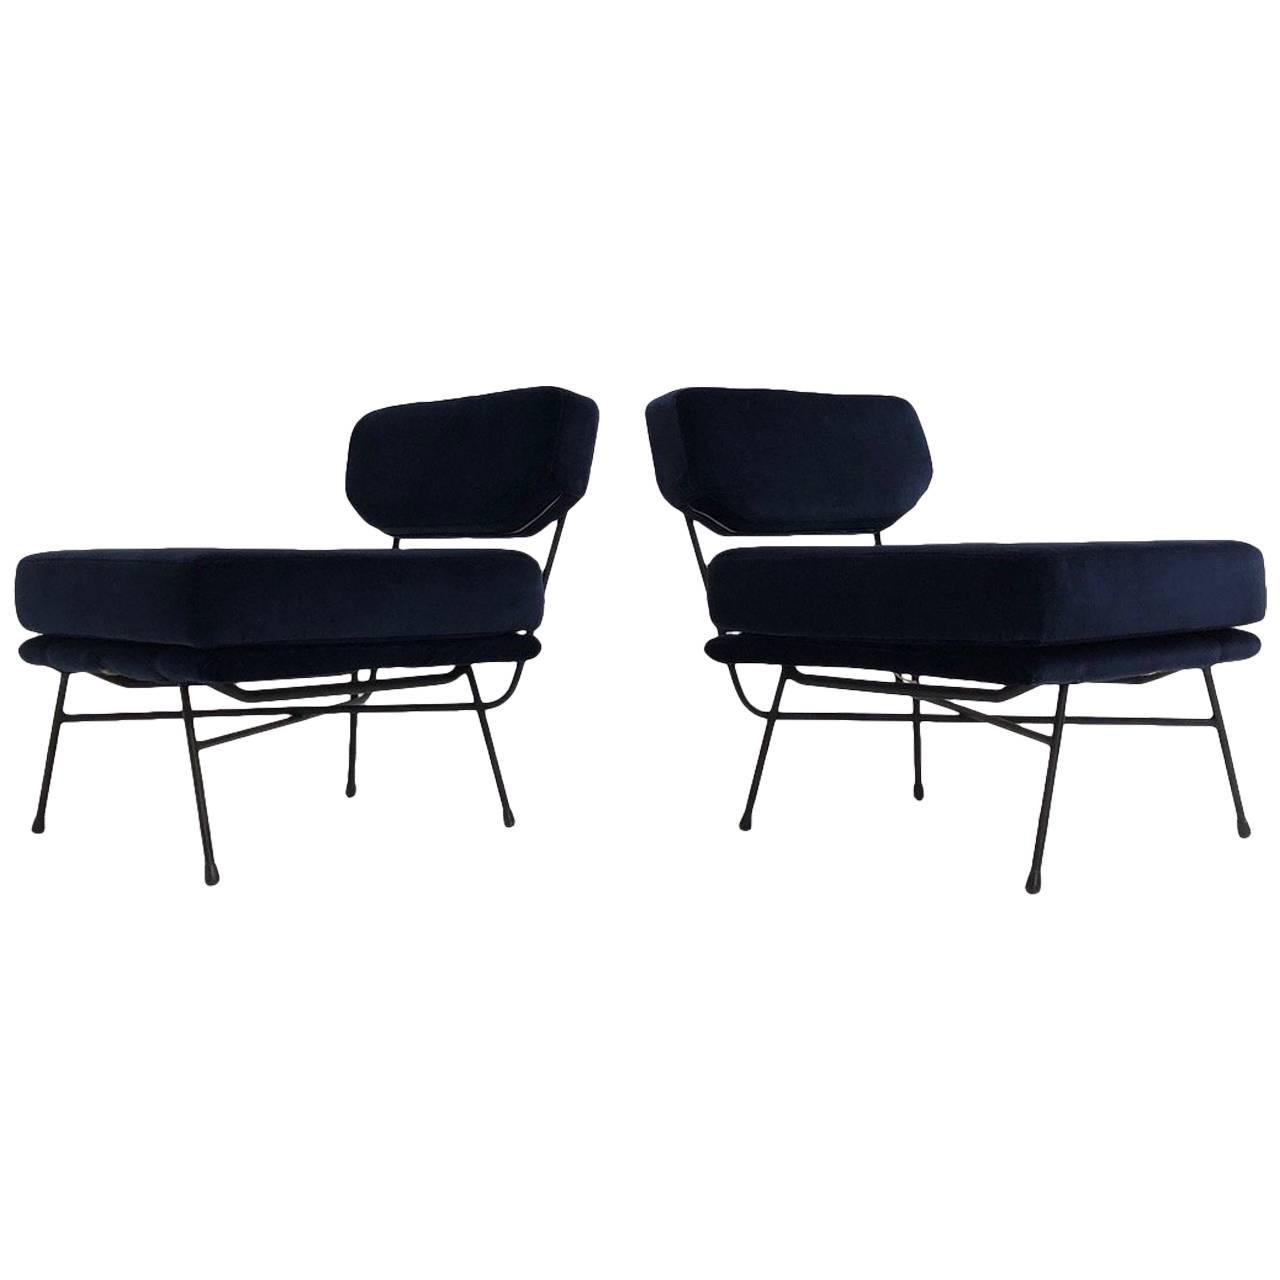 Pair of 'Elettra' Lounge Chairs by BBPR , Arflex,Italy 1953, Compasso D'Oro 1954